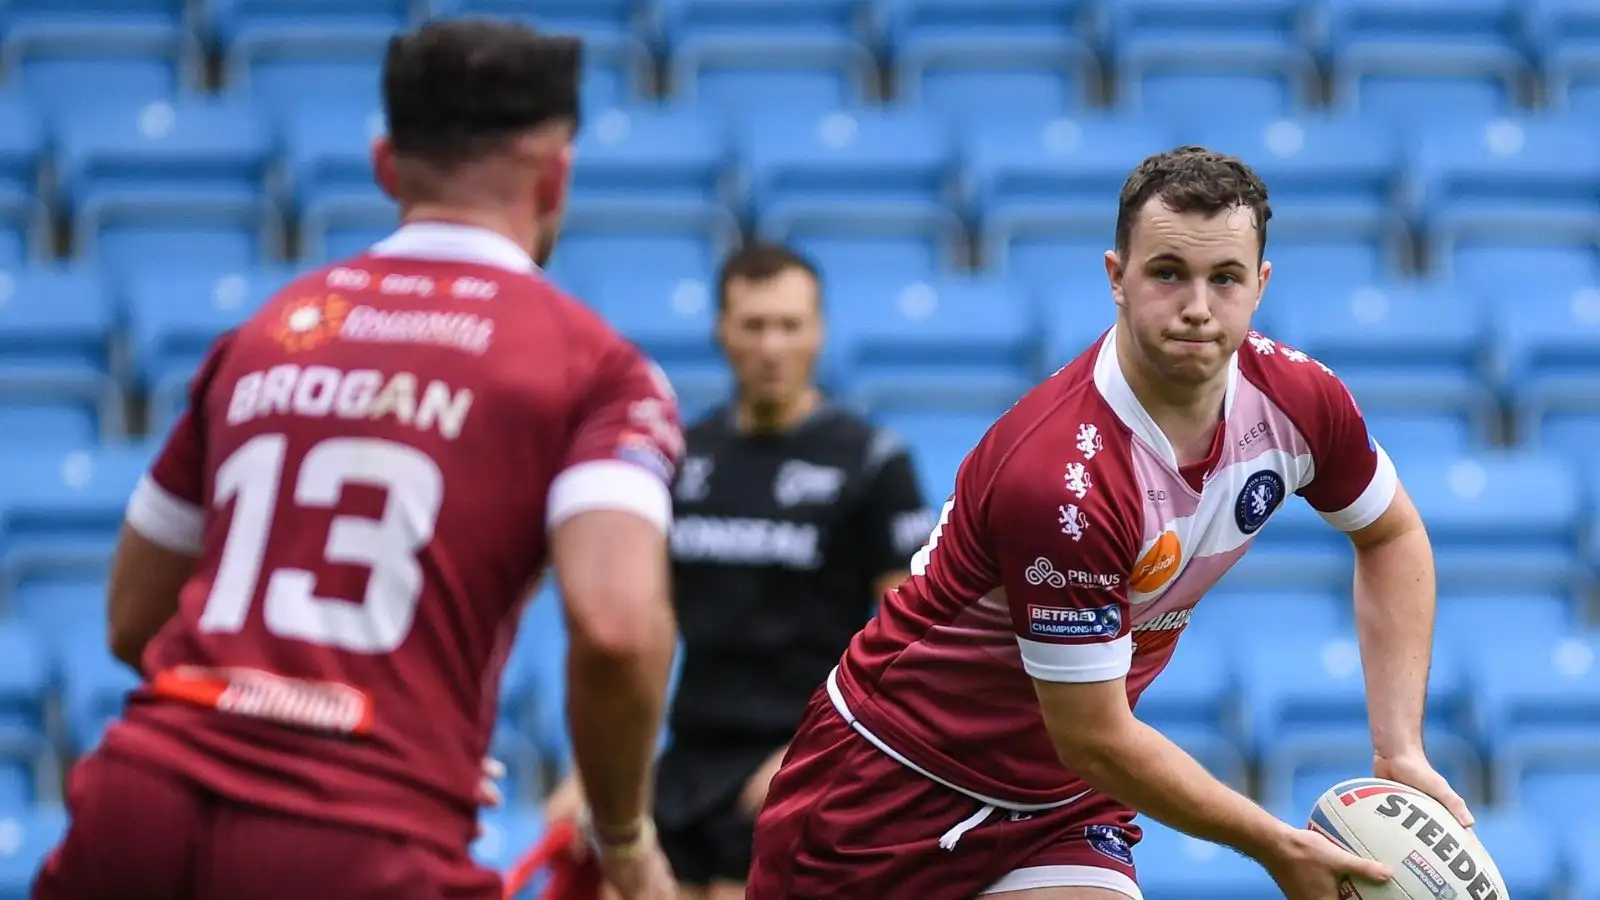 Former Wakefield Trinity youngster snapped up by fellow Championship club after successful stint out on loan